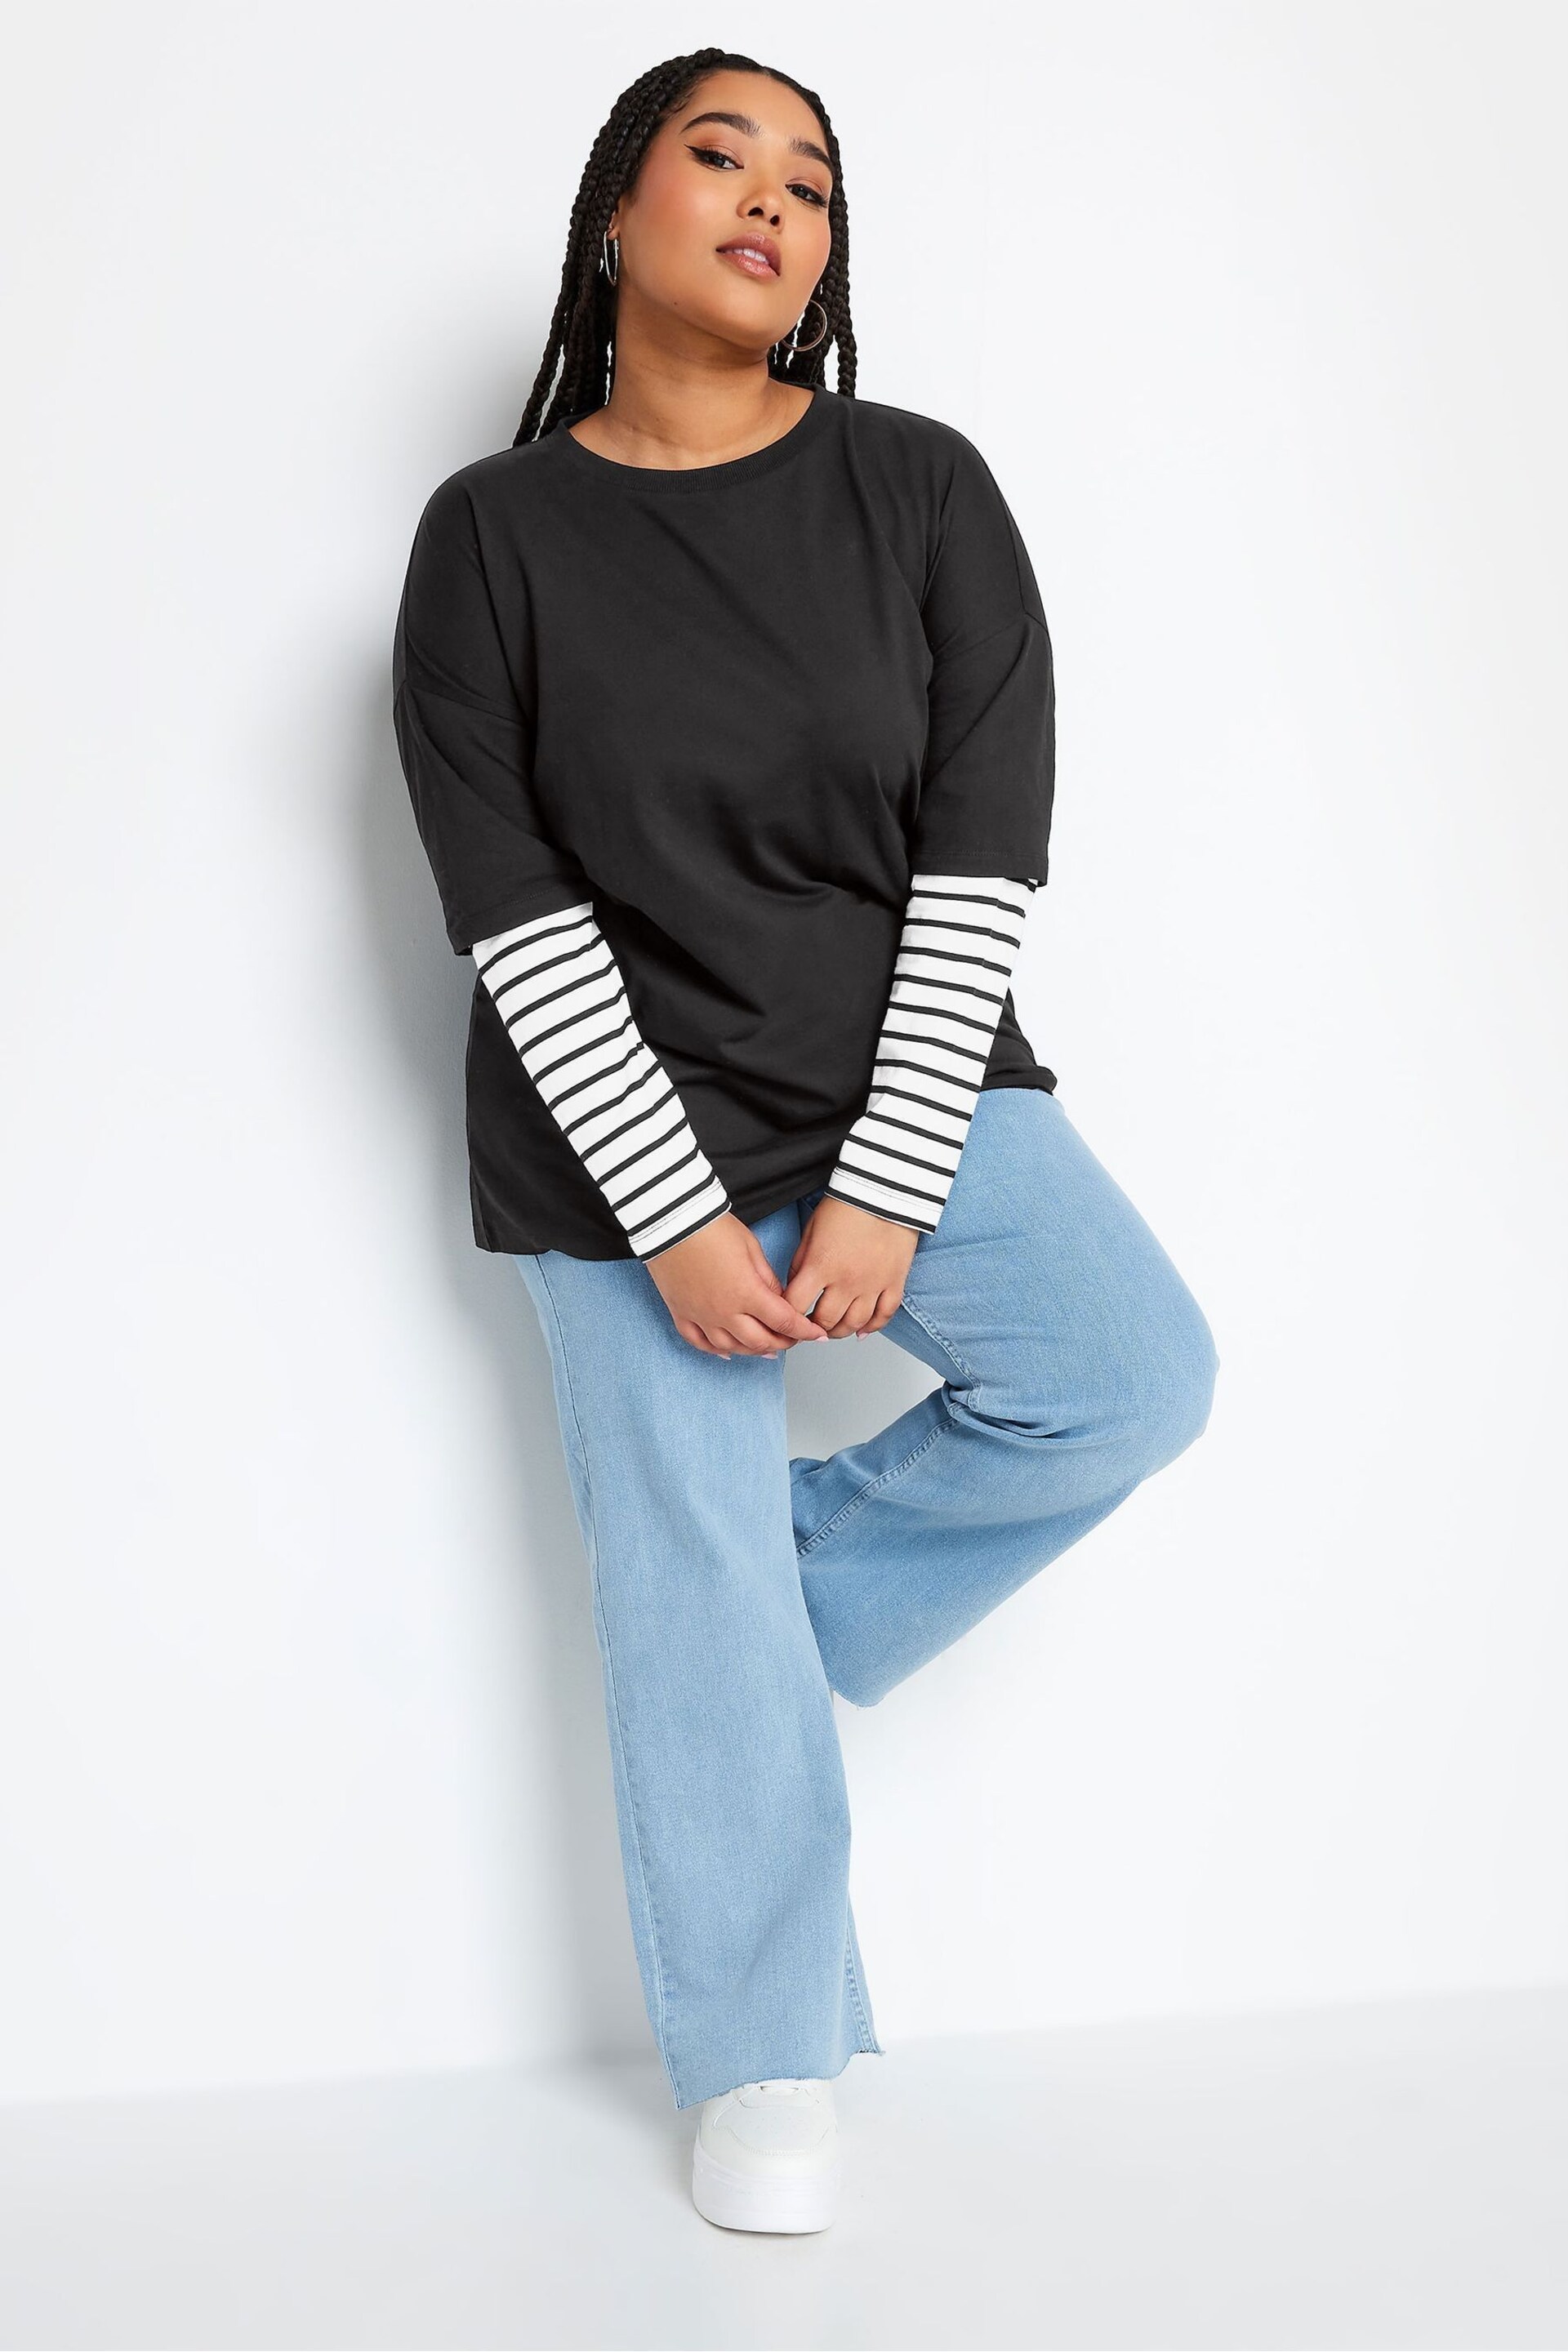 Yours Curve Black 2 In 1 Stripe Sleeve Top - Image 2 of 4